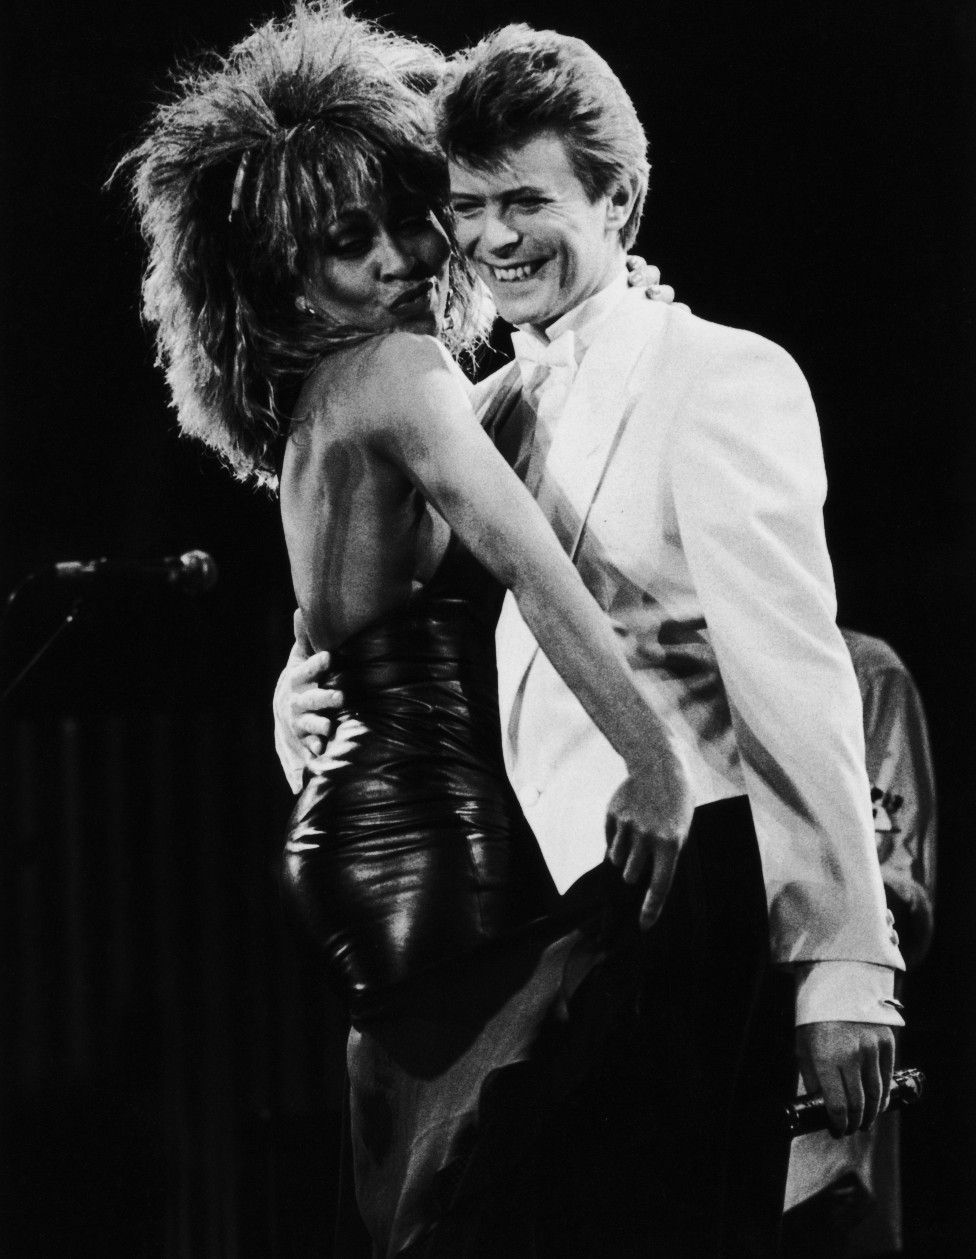 Singers David Bowie and Tina Turner perform on stage at the NEC Birmingham.